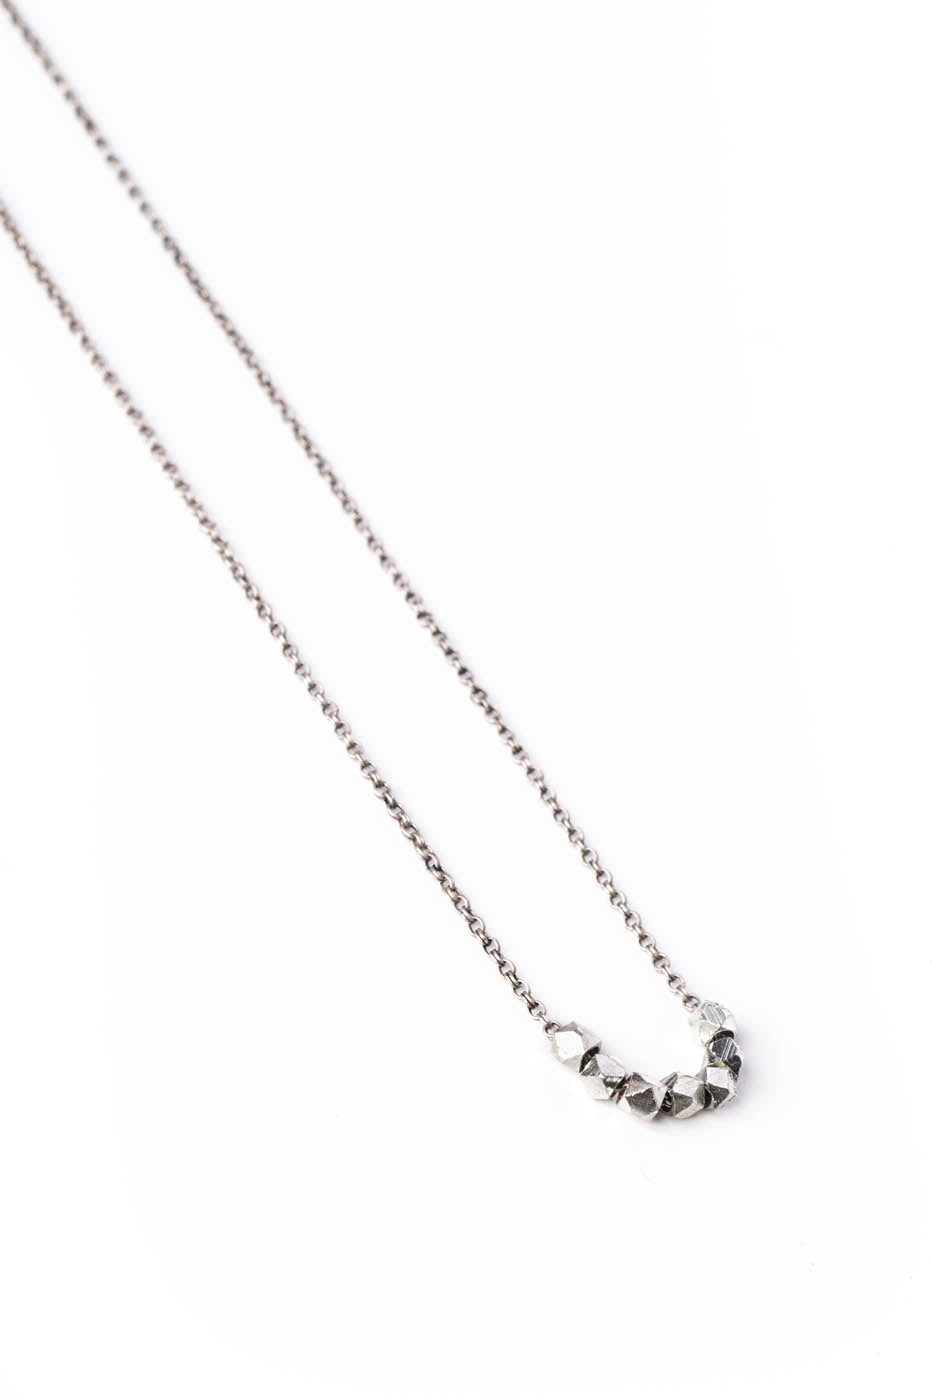 Small Silver Geometric Bead Necklace on Silver Chain